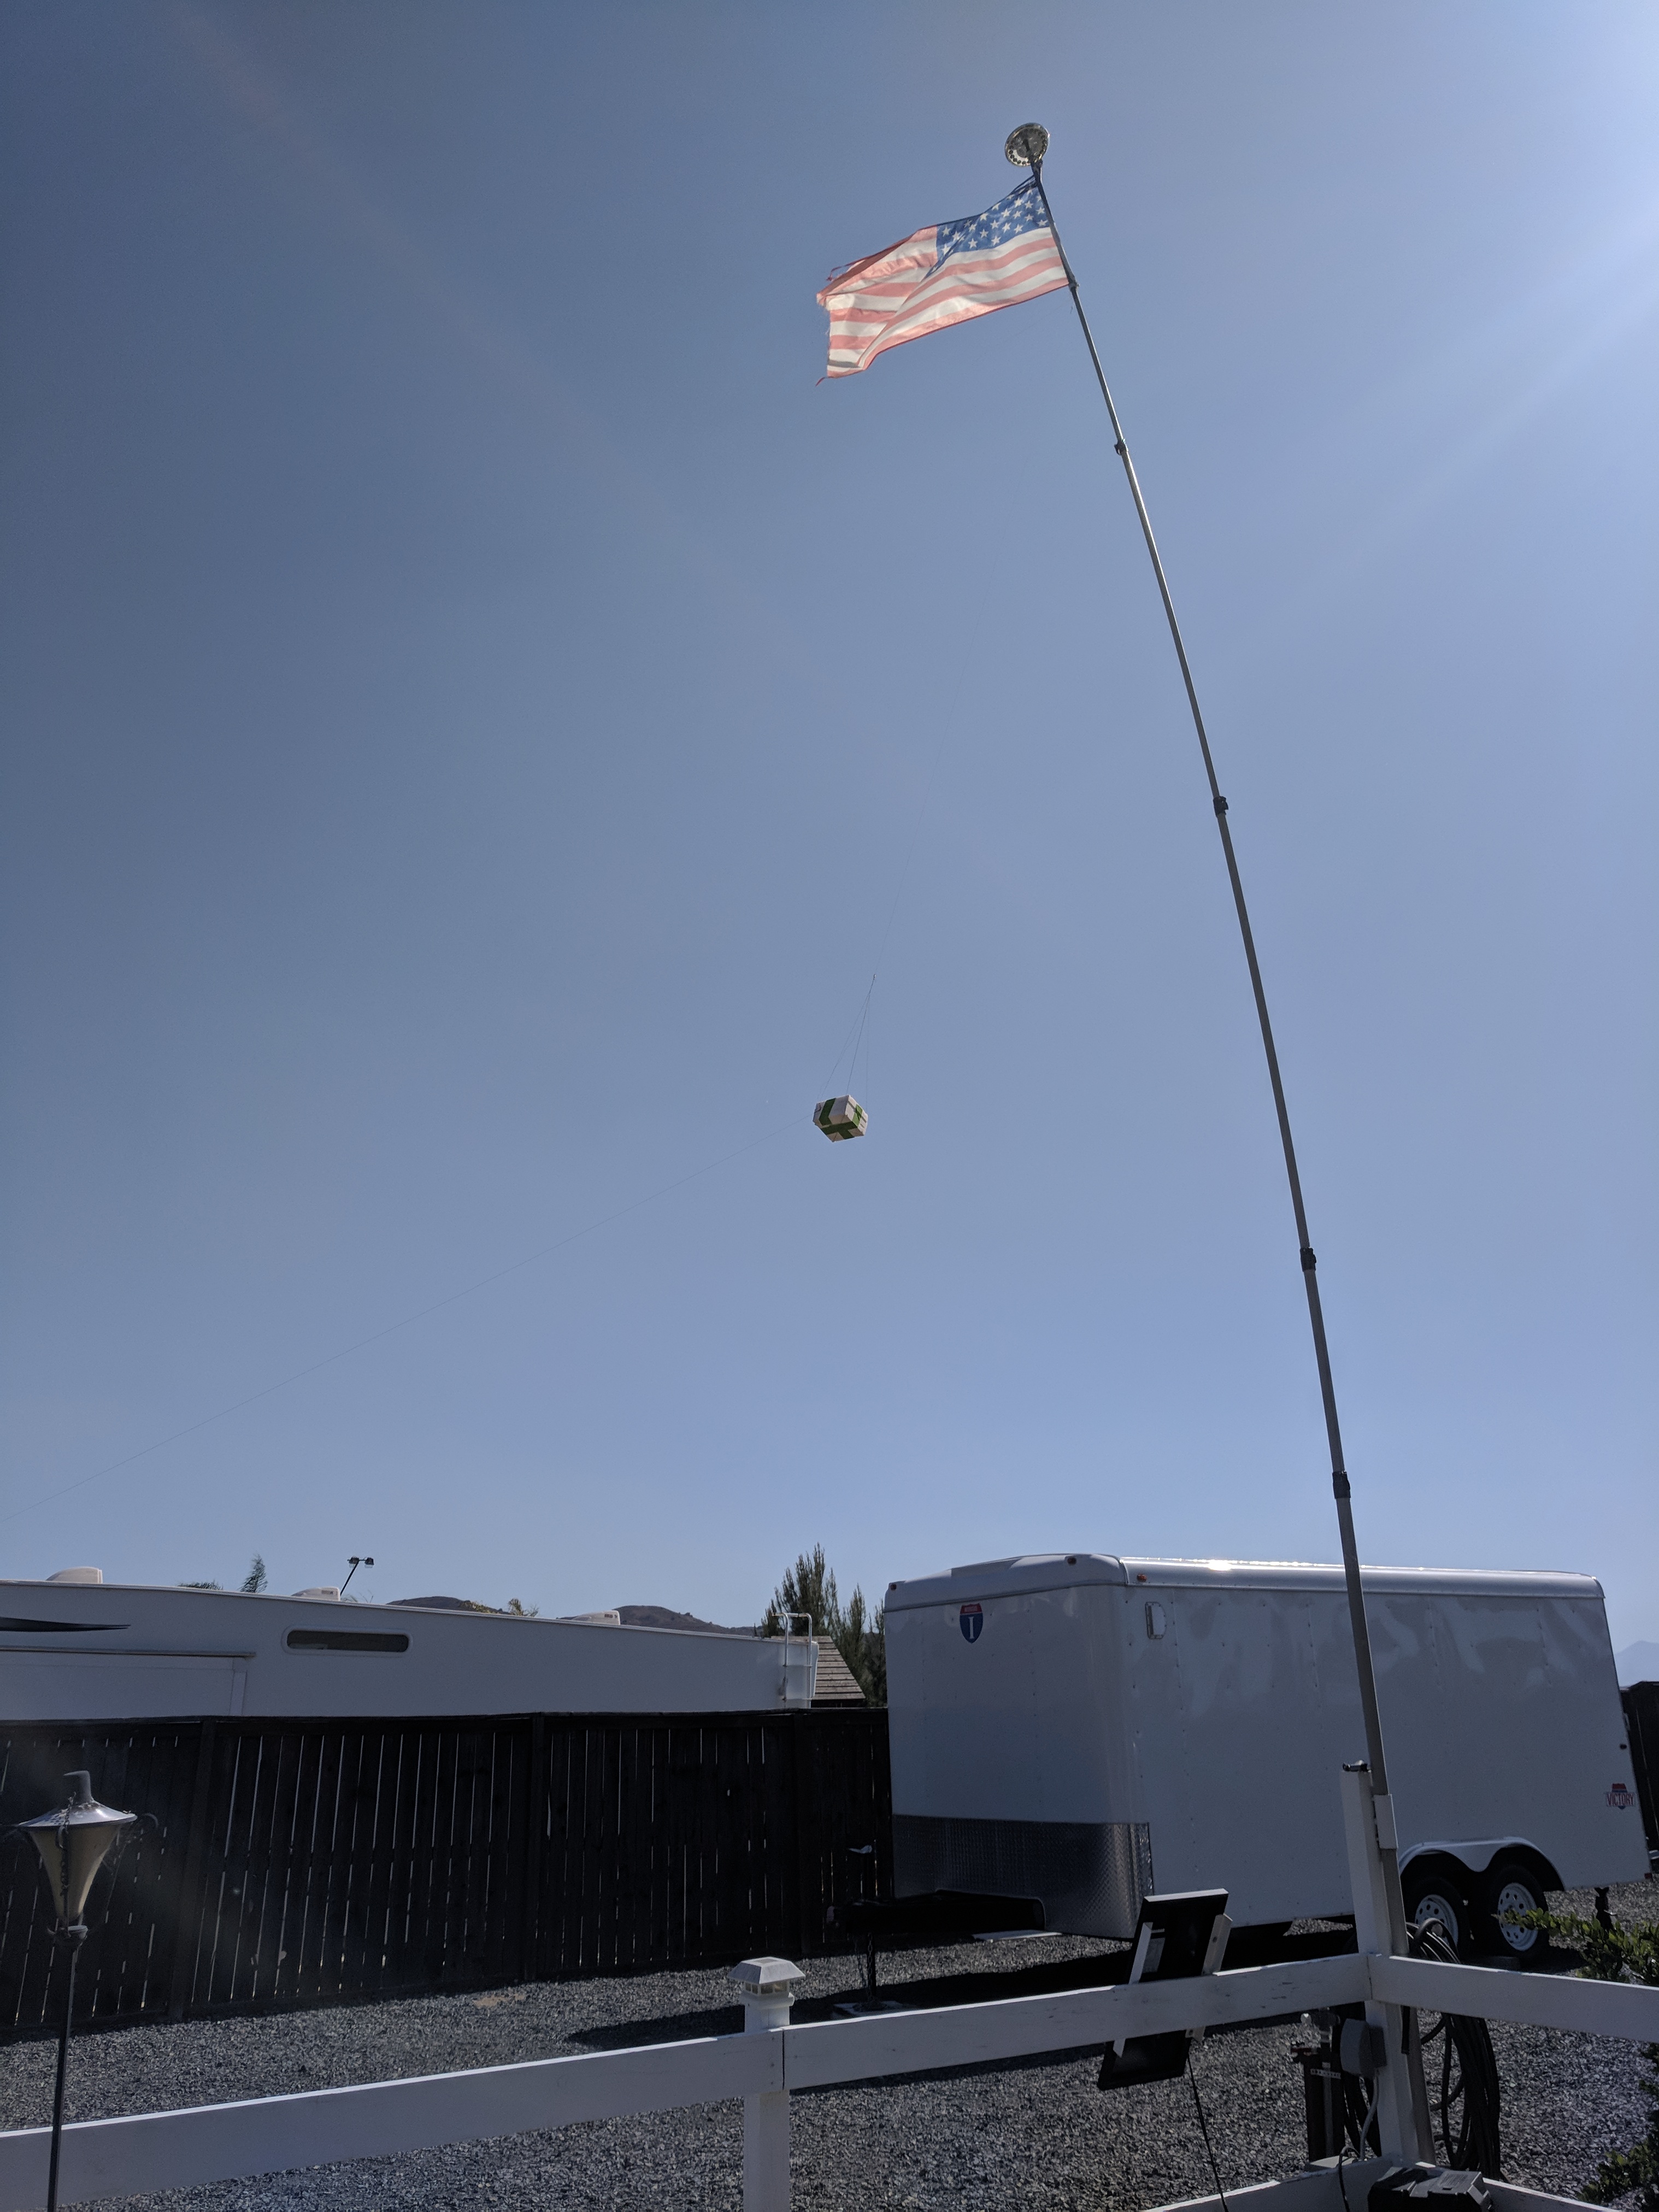 FS2 hanging from the flagpole.